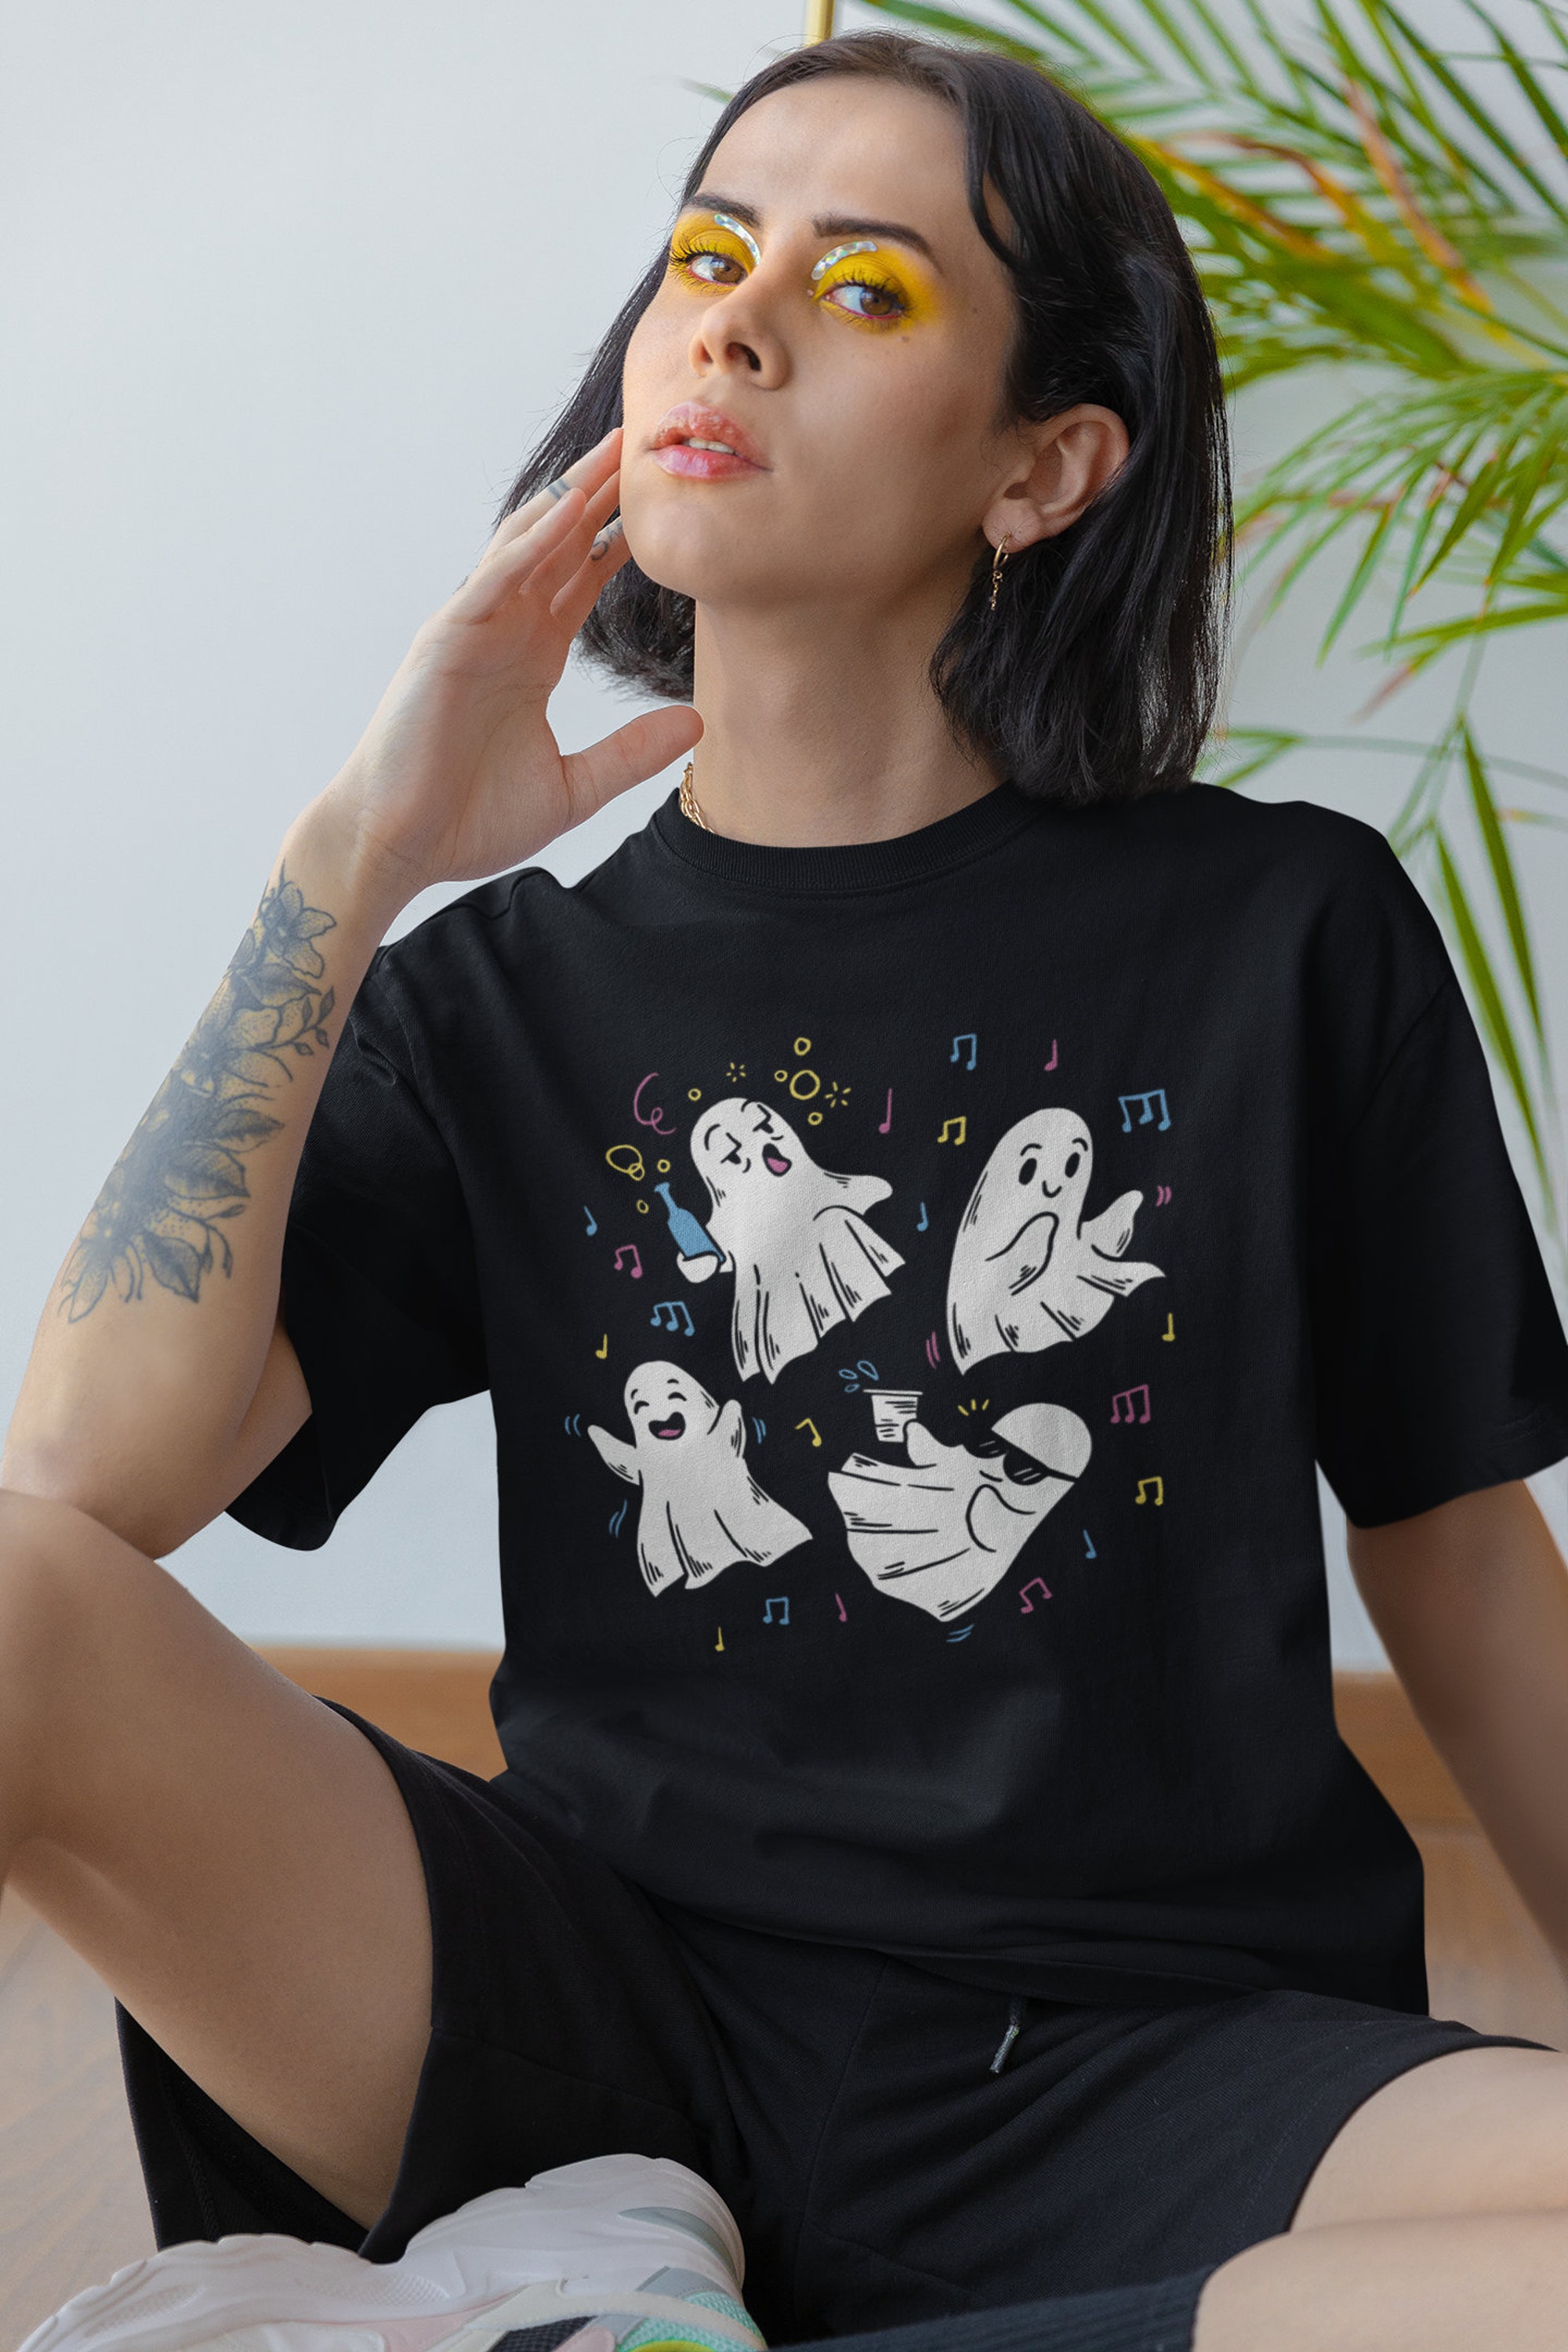 Discover Halloween Ghost Shirt, Halloween Party Shirt, Retro Halloween Shirt, Fall Shirts, Floral Ghost Shirt, Ghost Shirt, Autumn Shirt, Cute Ghost